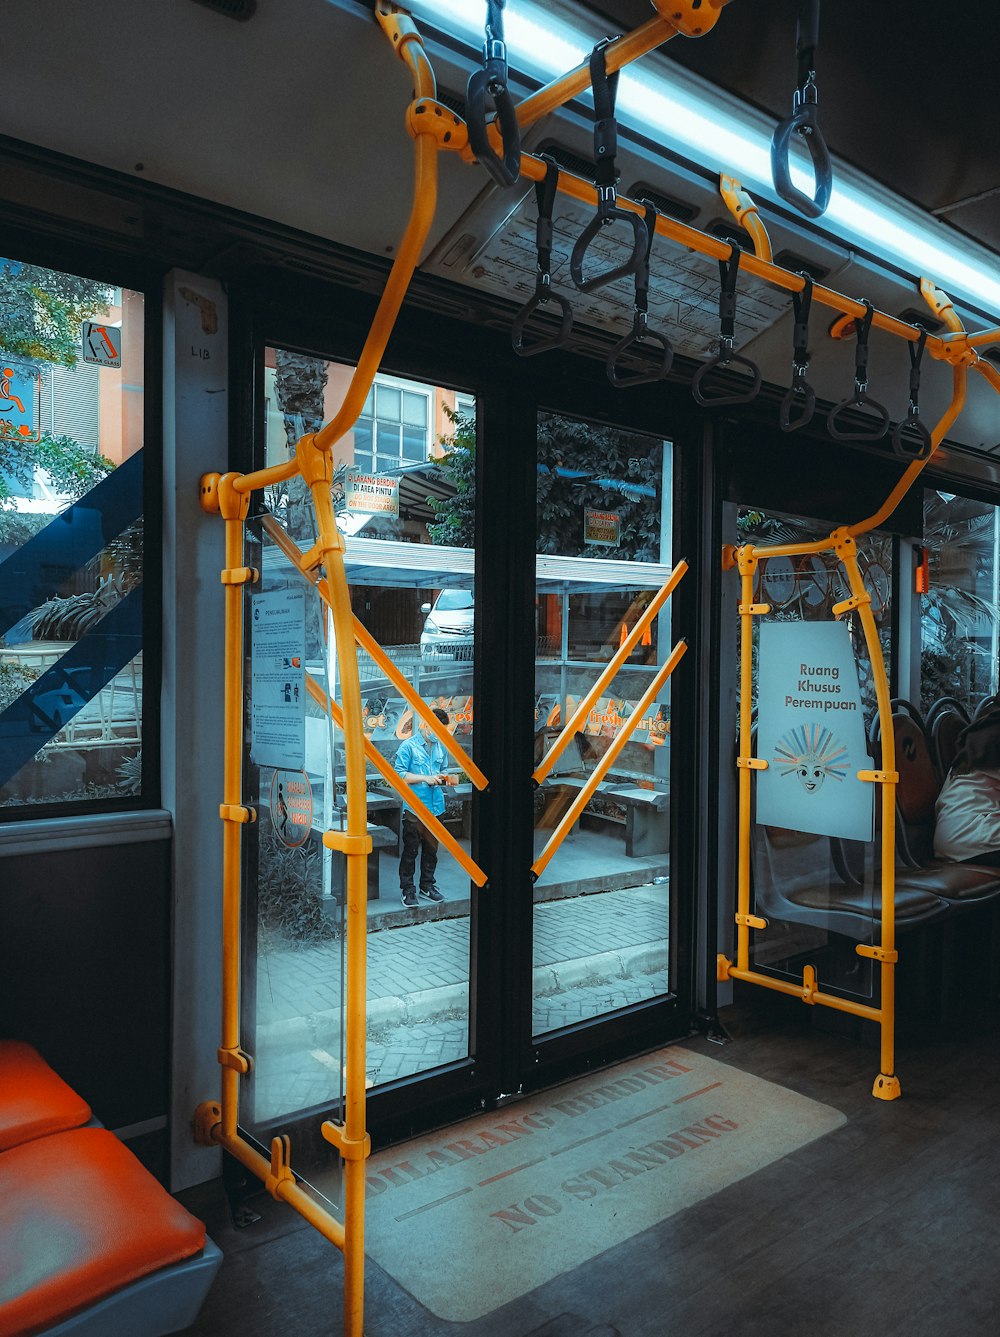 the inside of a bus with yellow railings